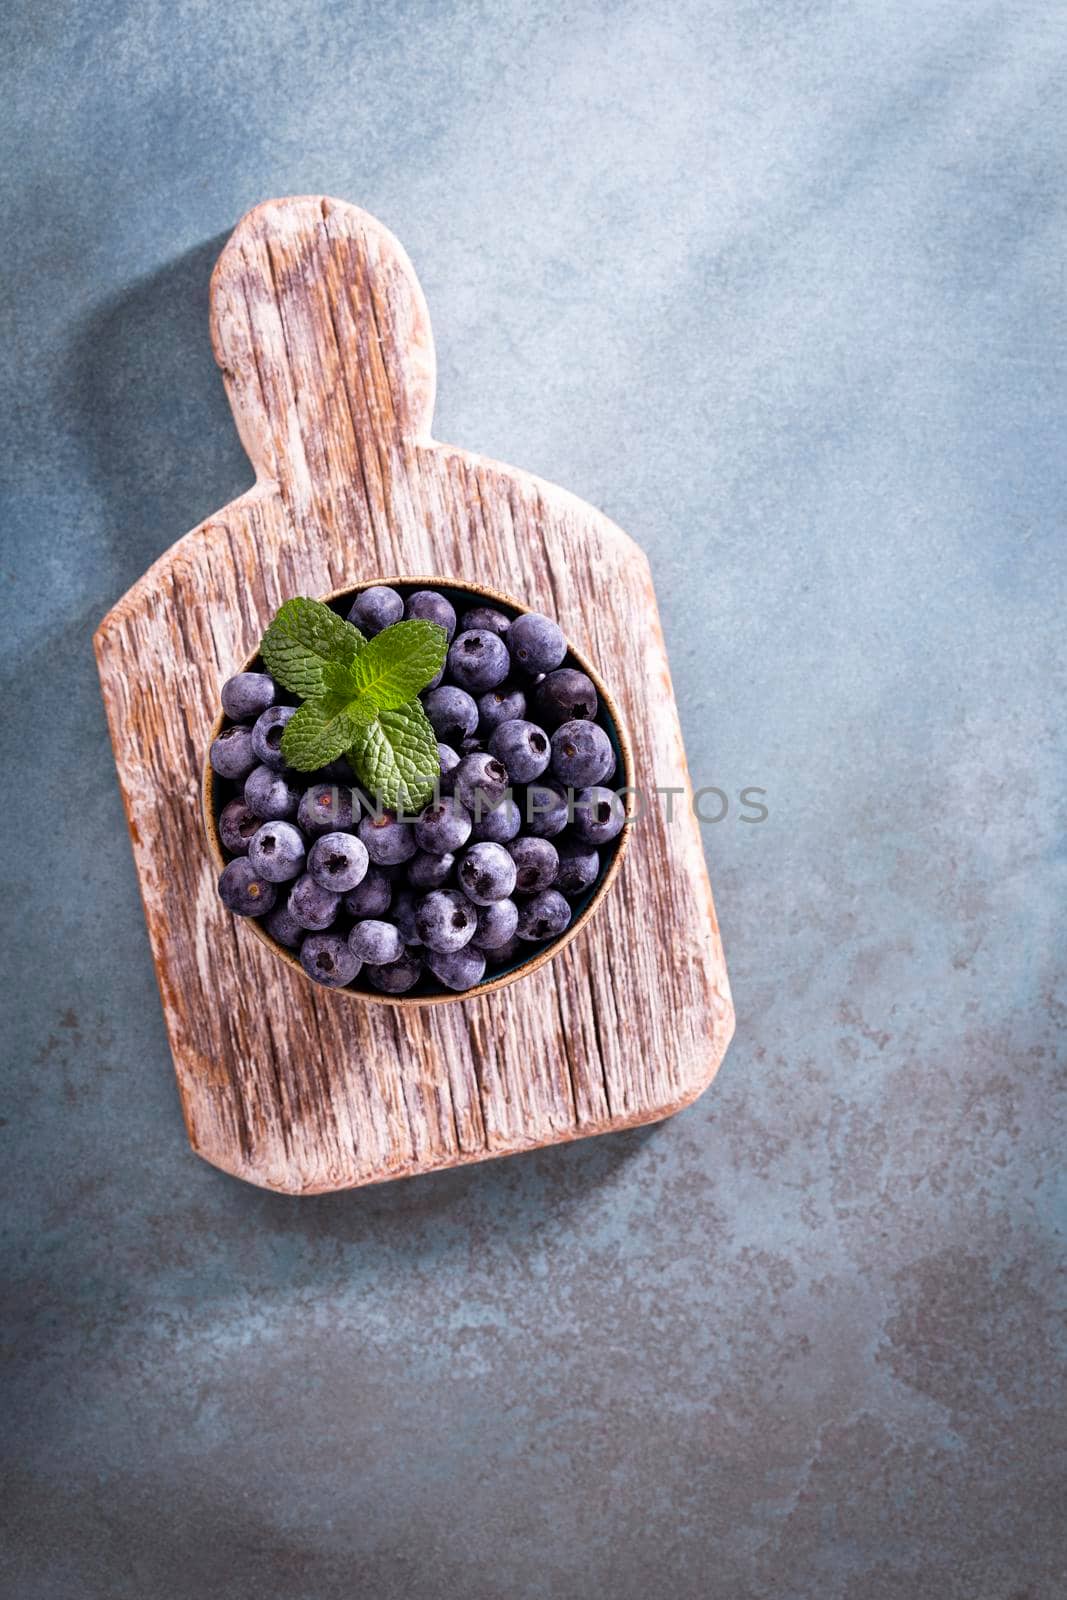 Bowl of fresh blueberries on rustic wooden board. Organic food blueberries and mint leaf for healthy lifestyle. by gitusik